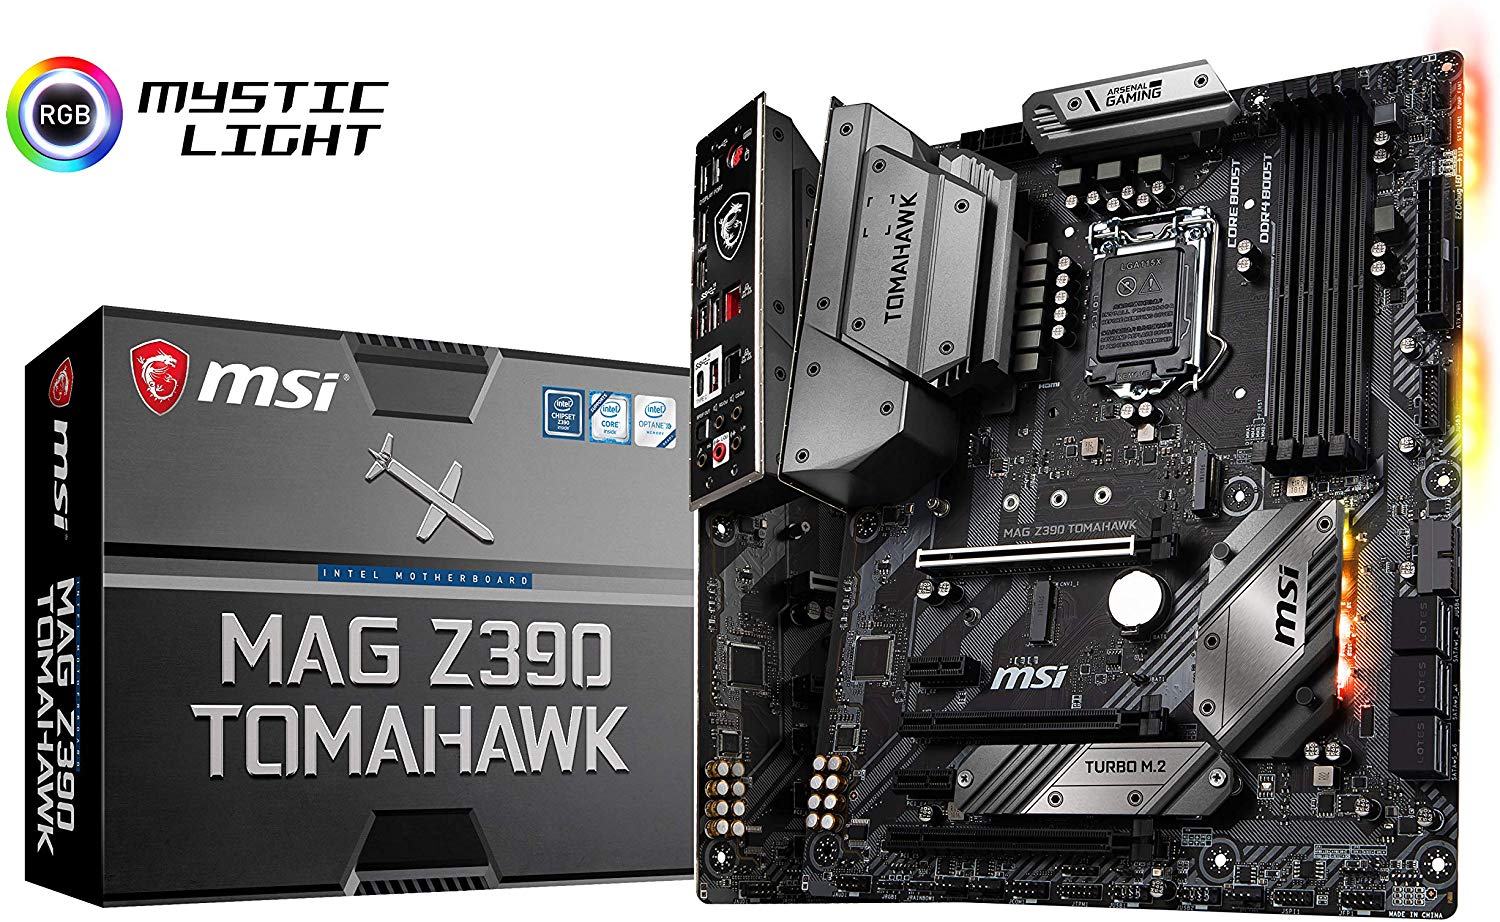 https://www.windowscentral.com/sites/wpcentral.com/files/field/image/2019/11/msi-mag-z390-tomahawk-motherboard-cropped.jpg